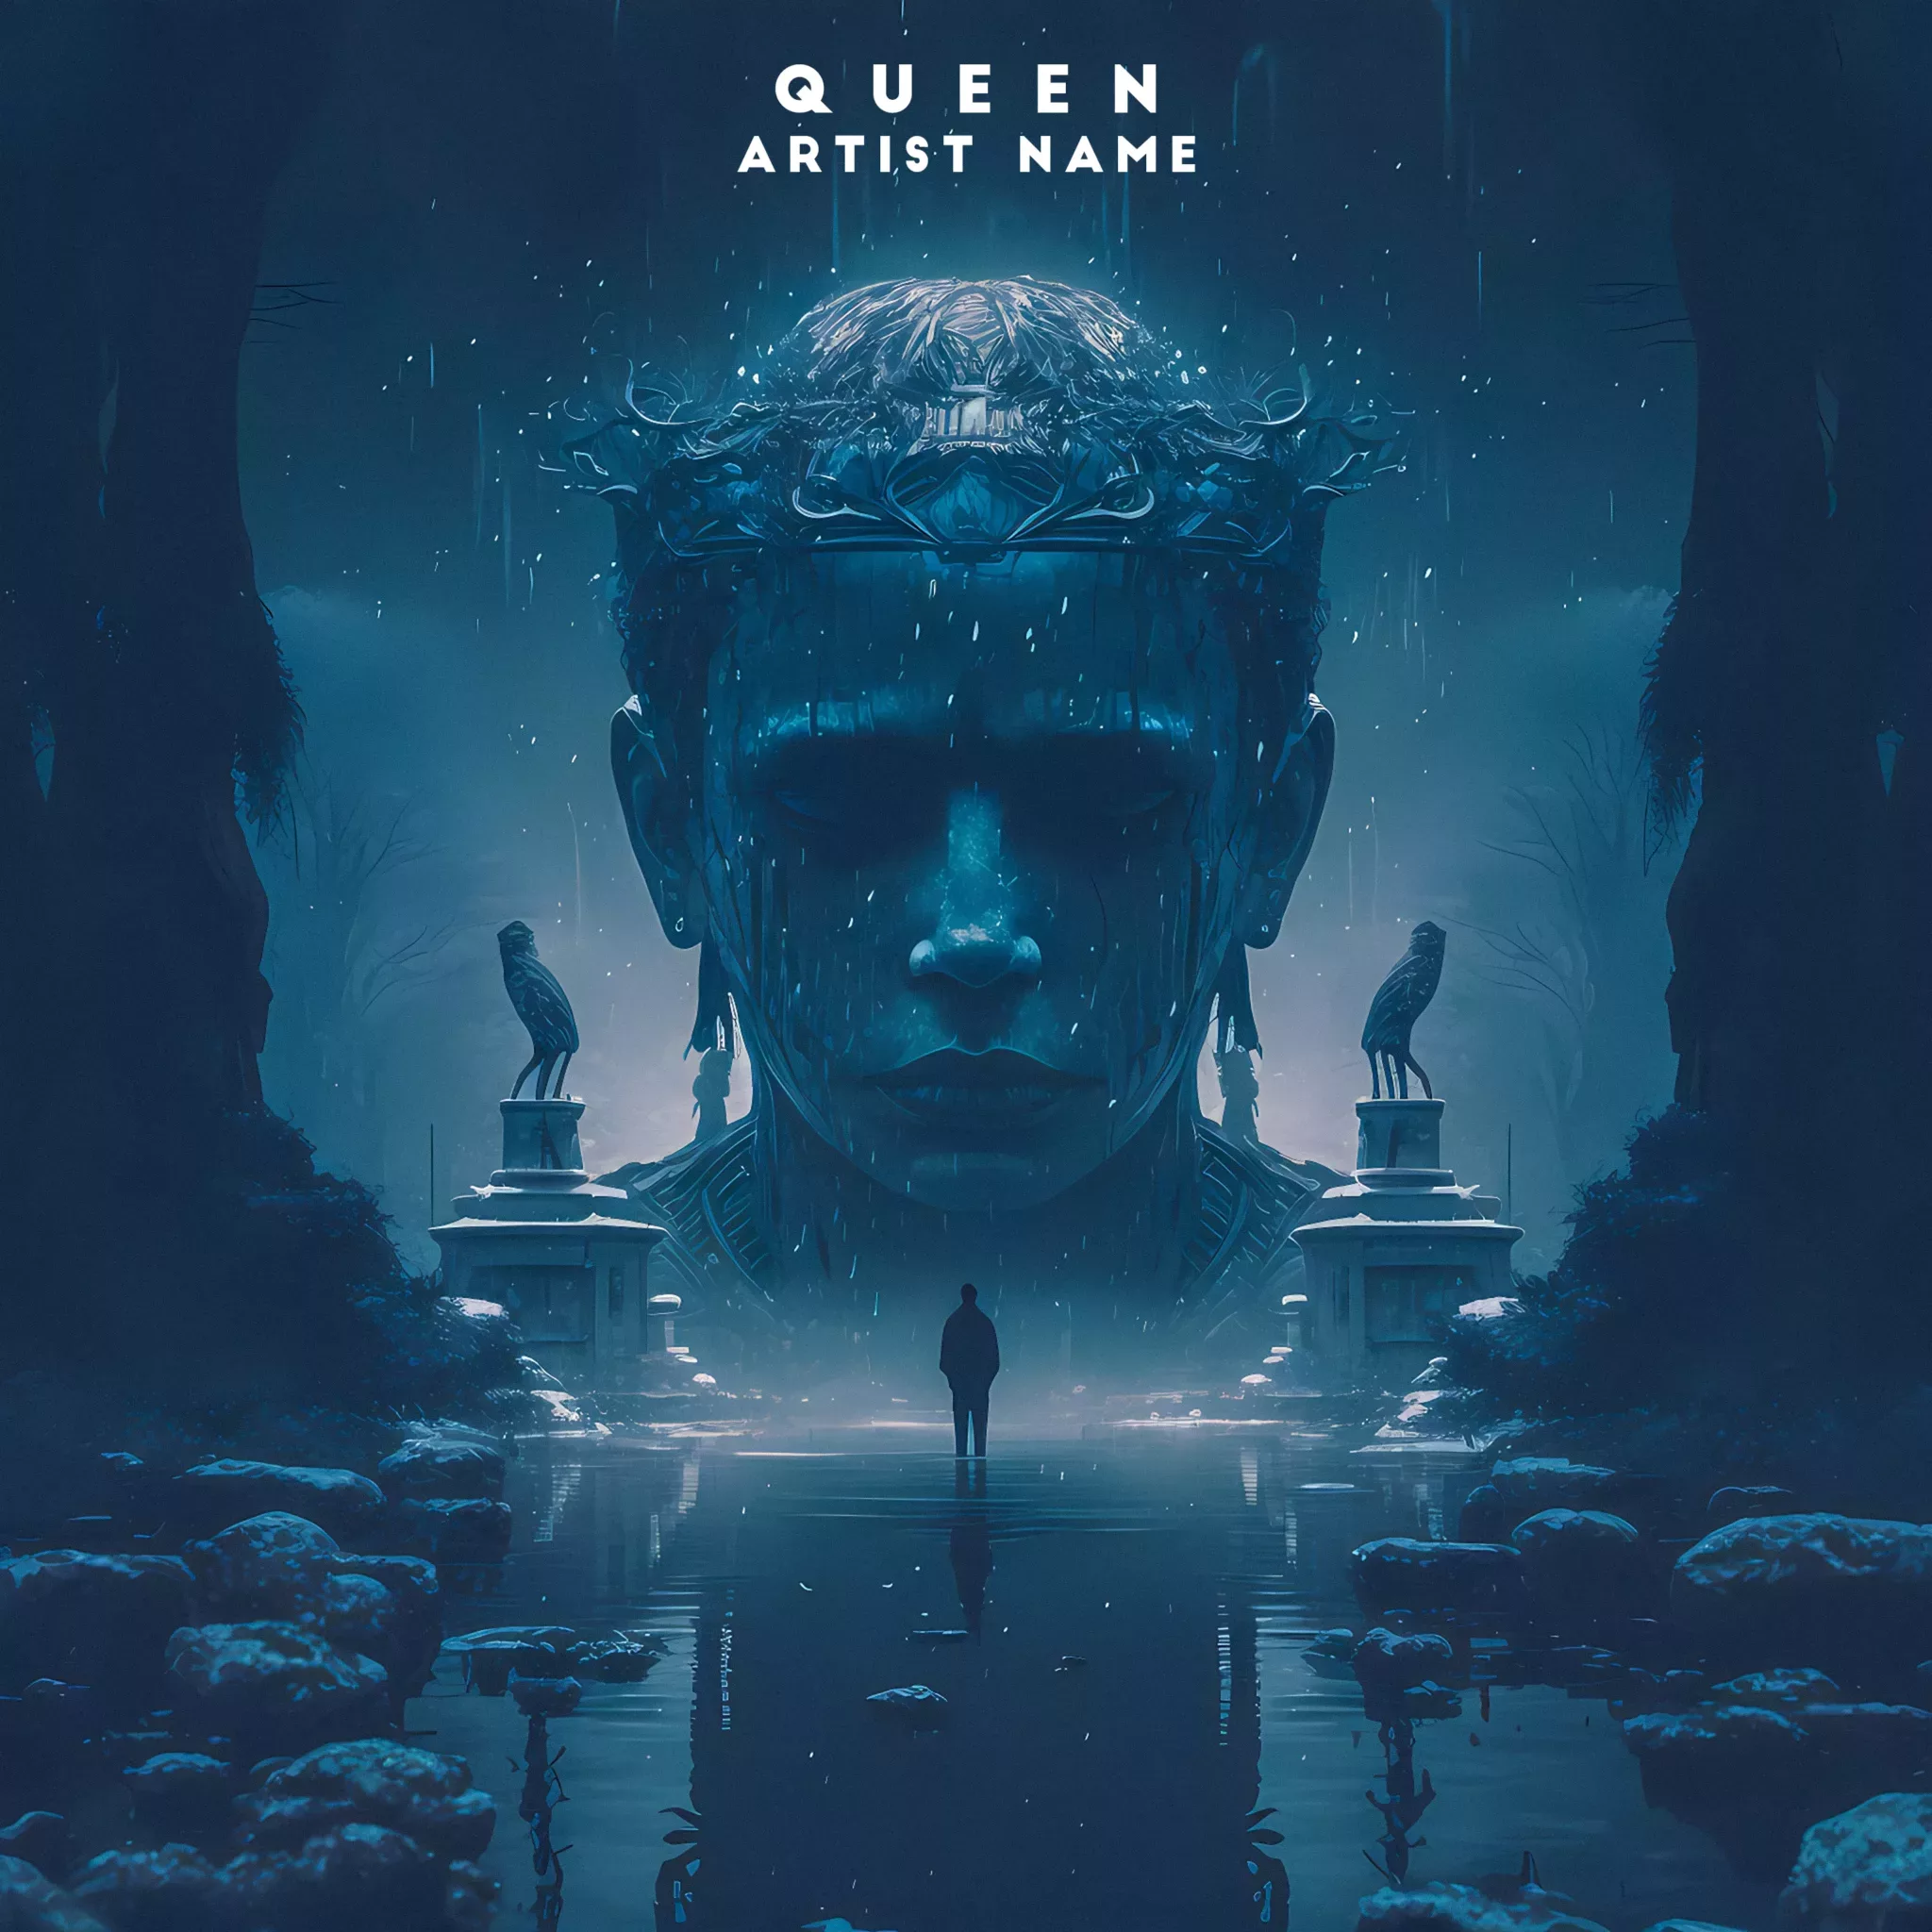 Queen cover art for sale